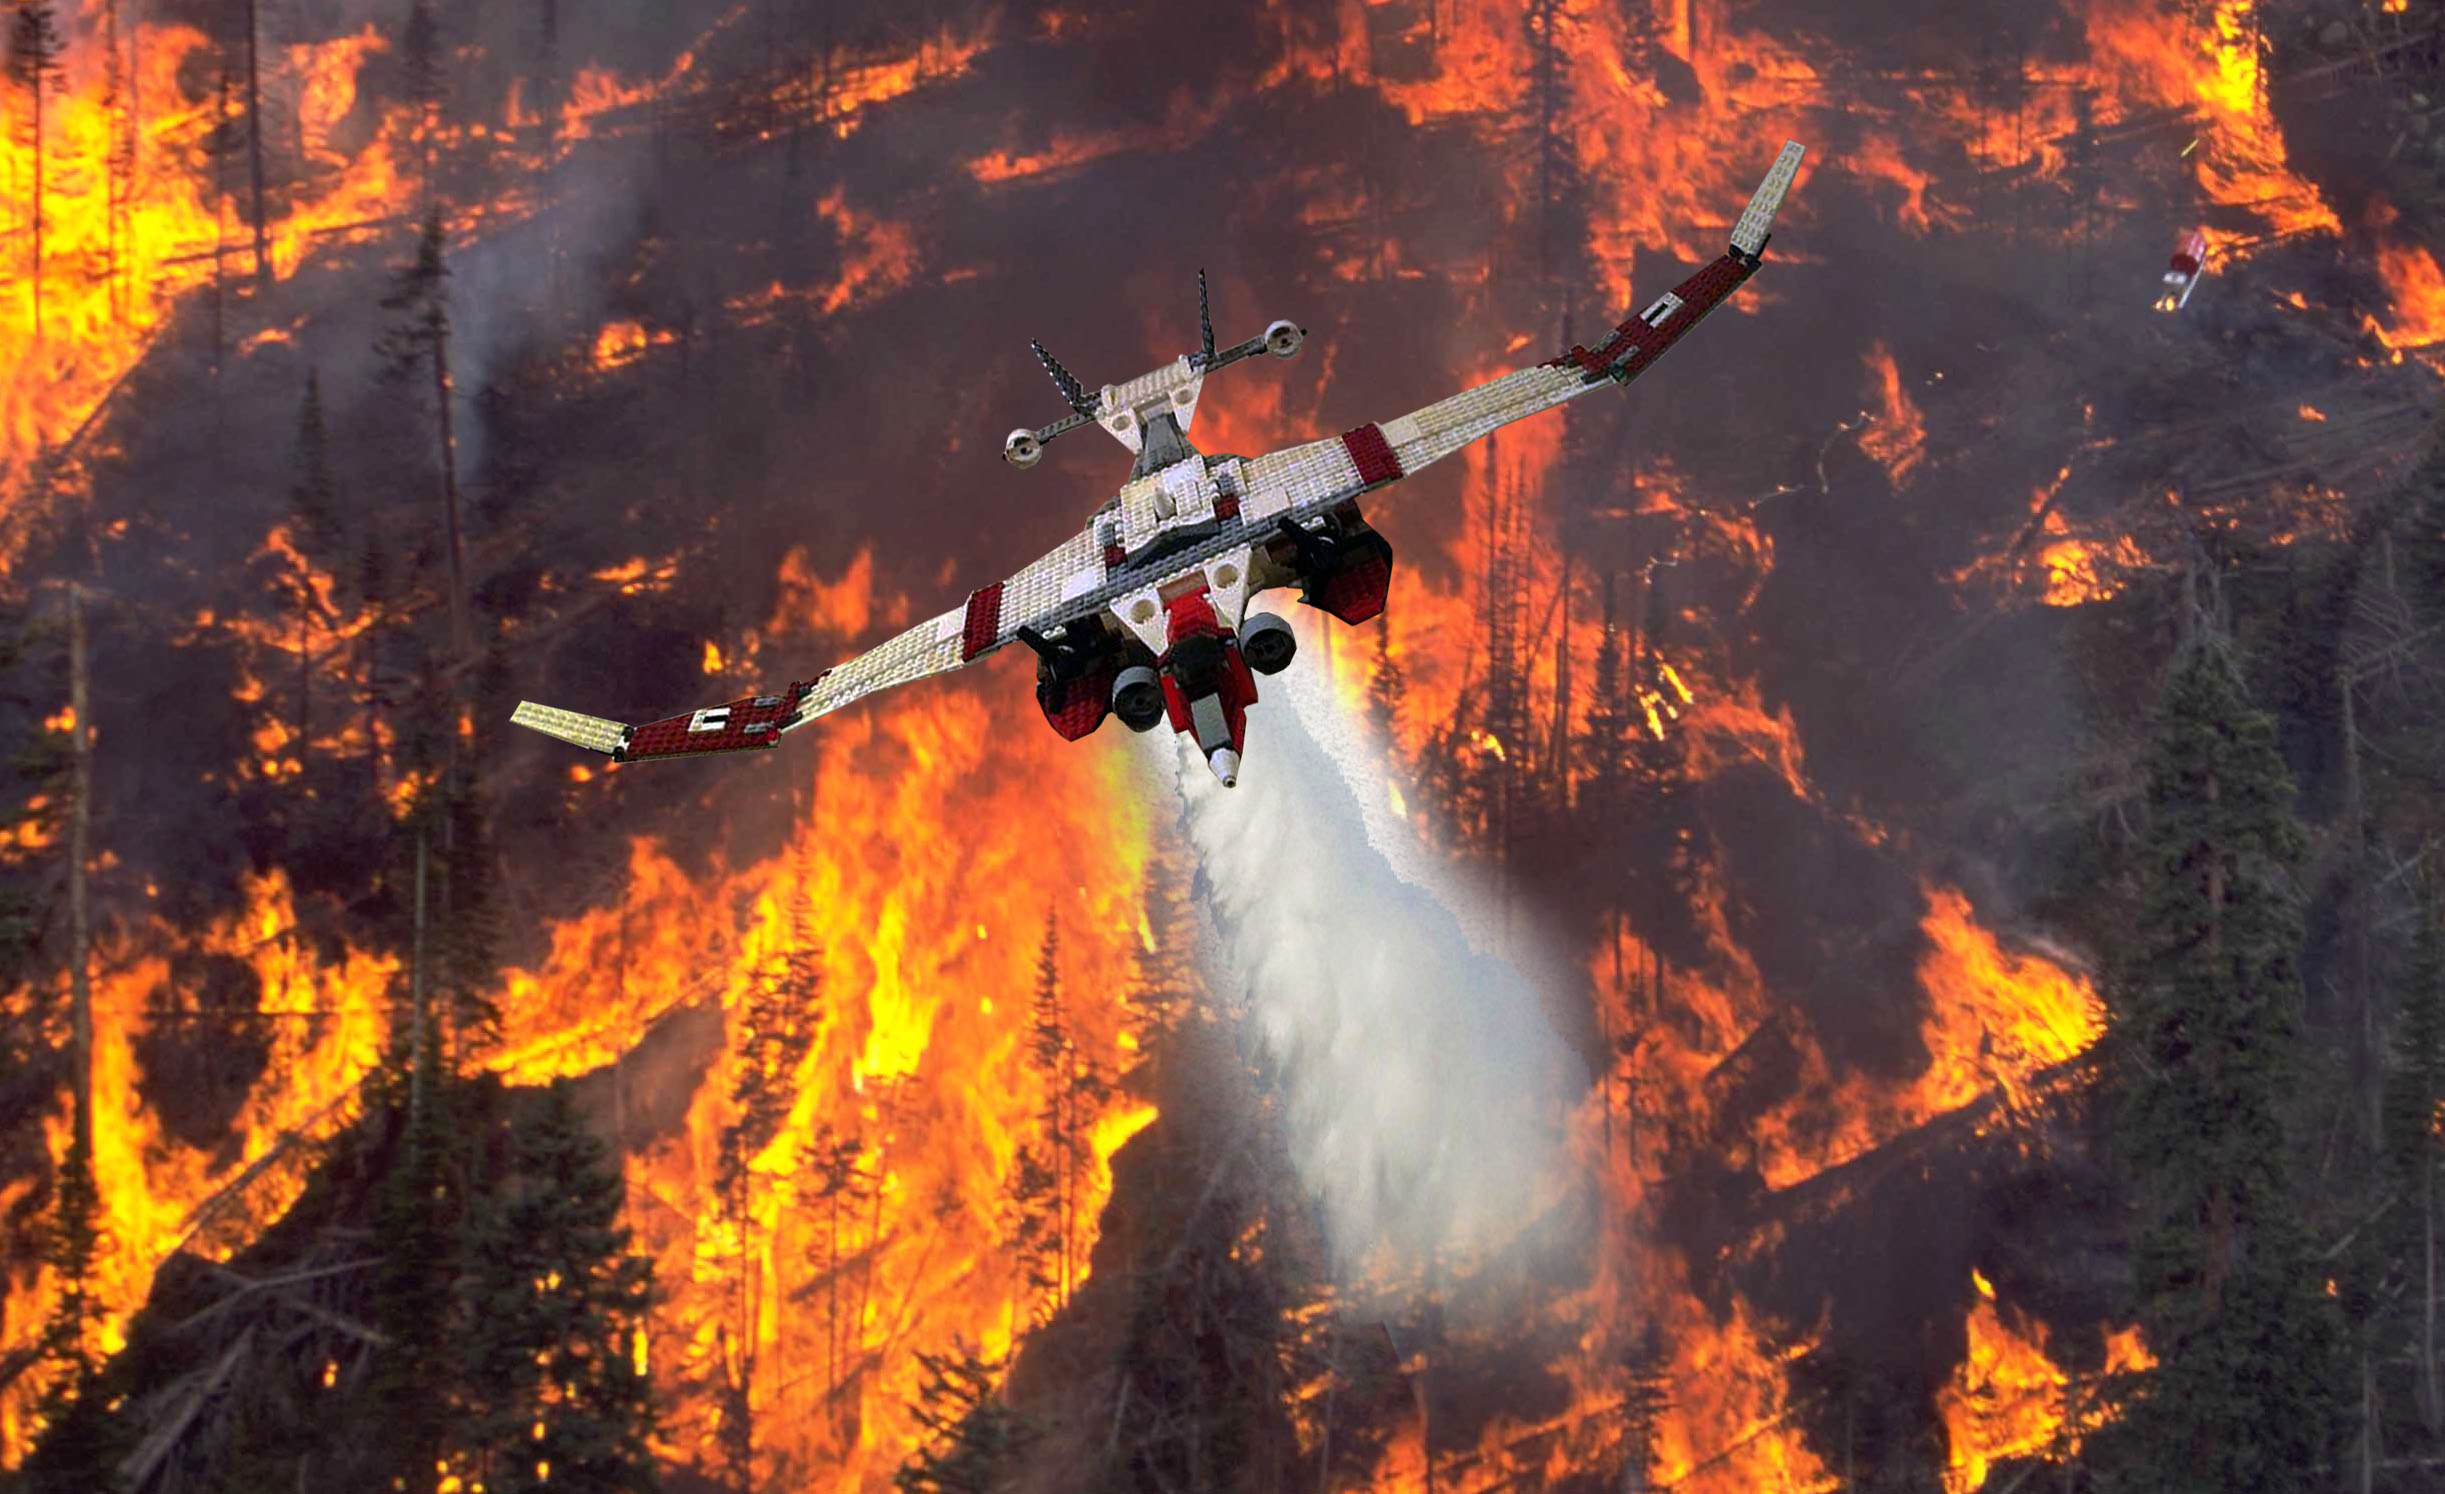 Artist composite of a supertanker lego aircraft putting out a wildfire.